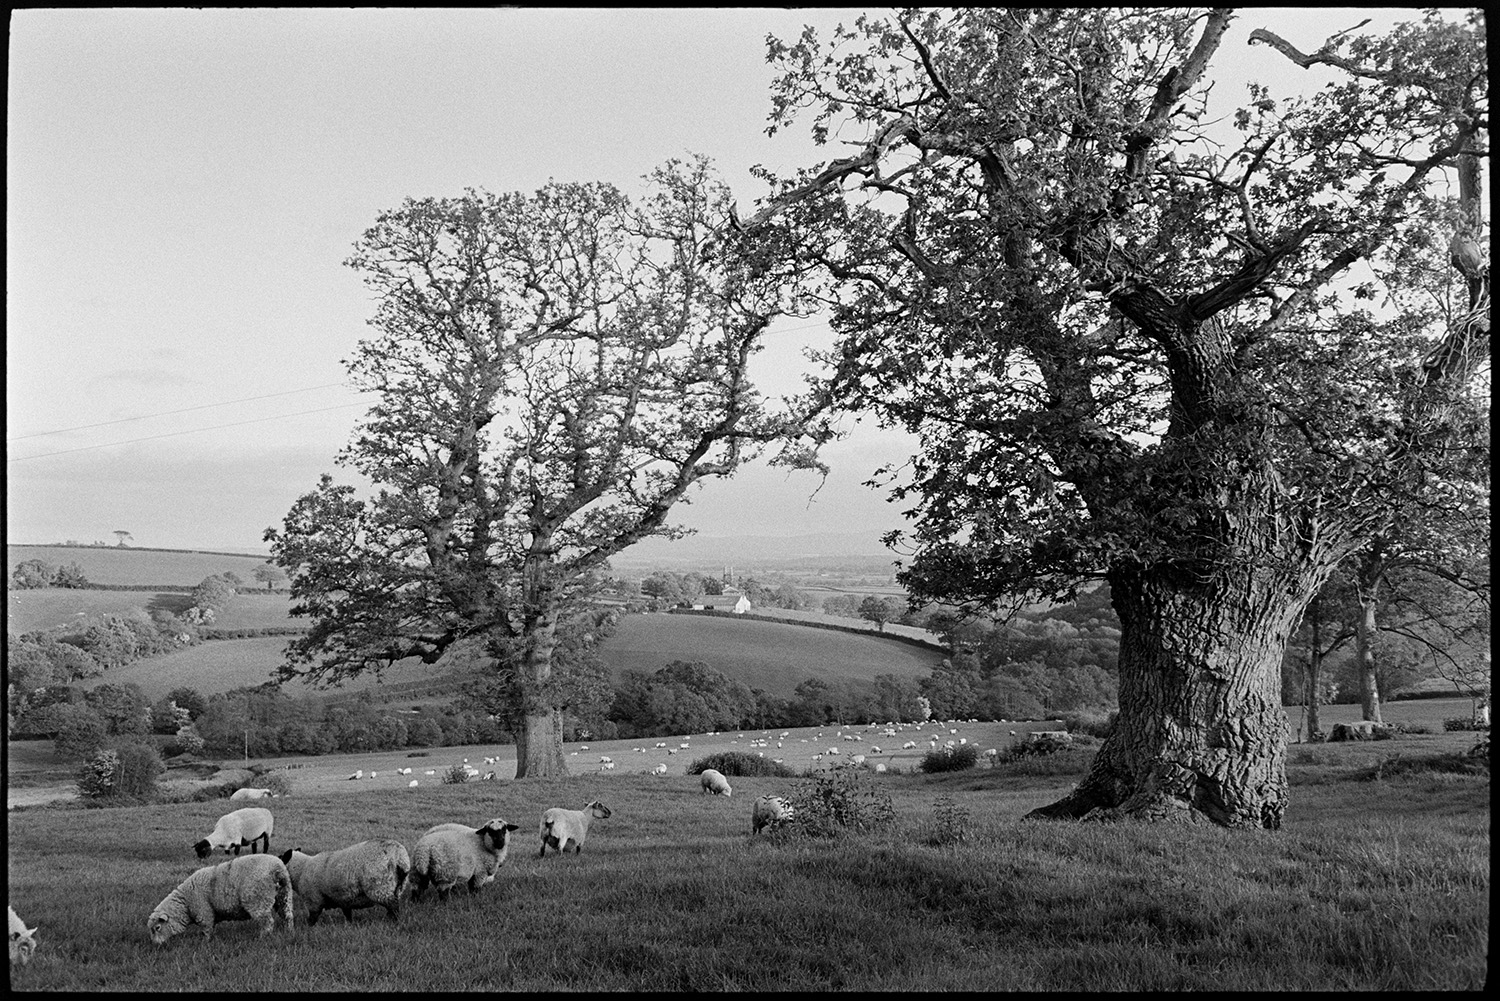 Wooded landscape with grazing sheep, evening. 
[Sheep grazing in a field with trees at Berry, Iddesleigh. A landscape of fields and trees can be seen in the background.]